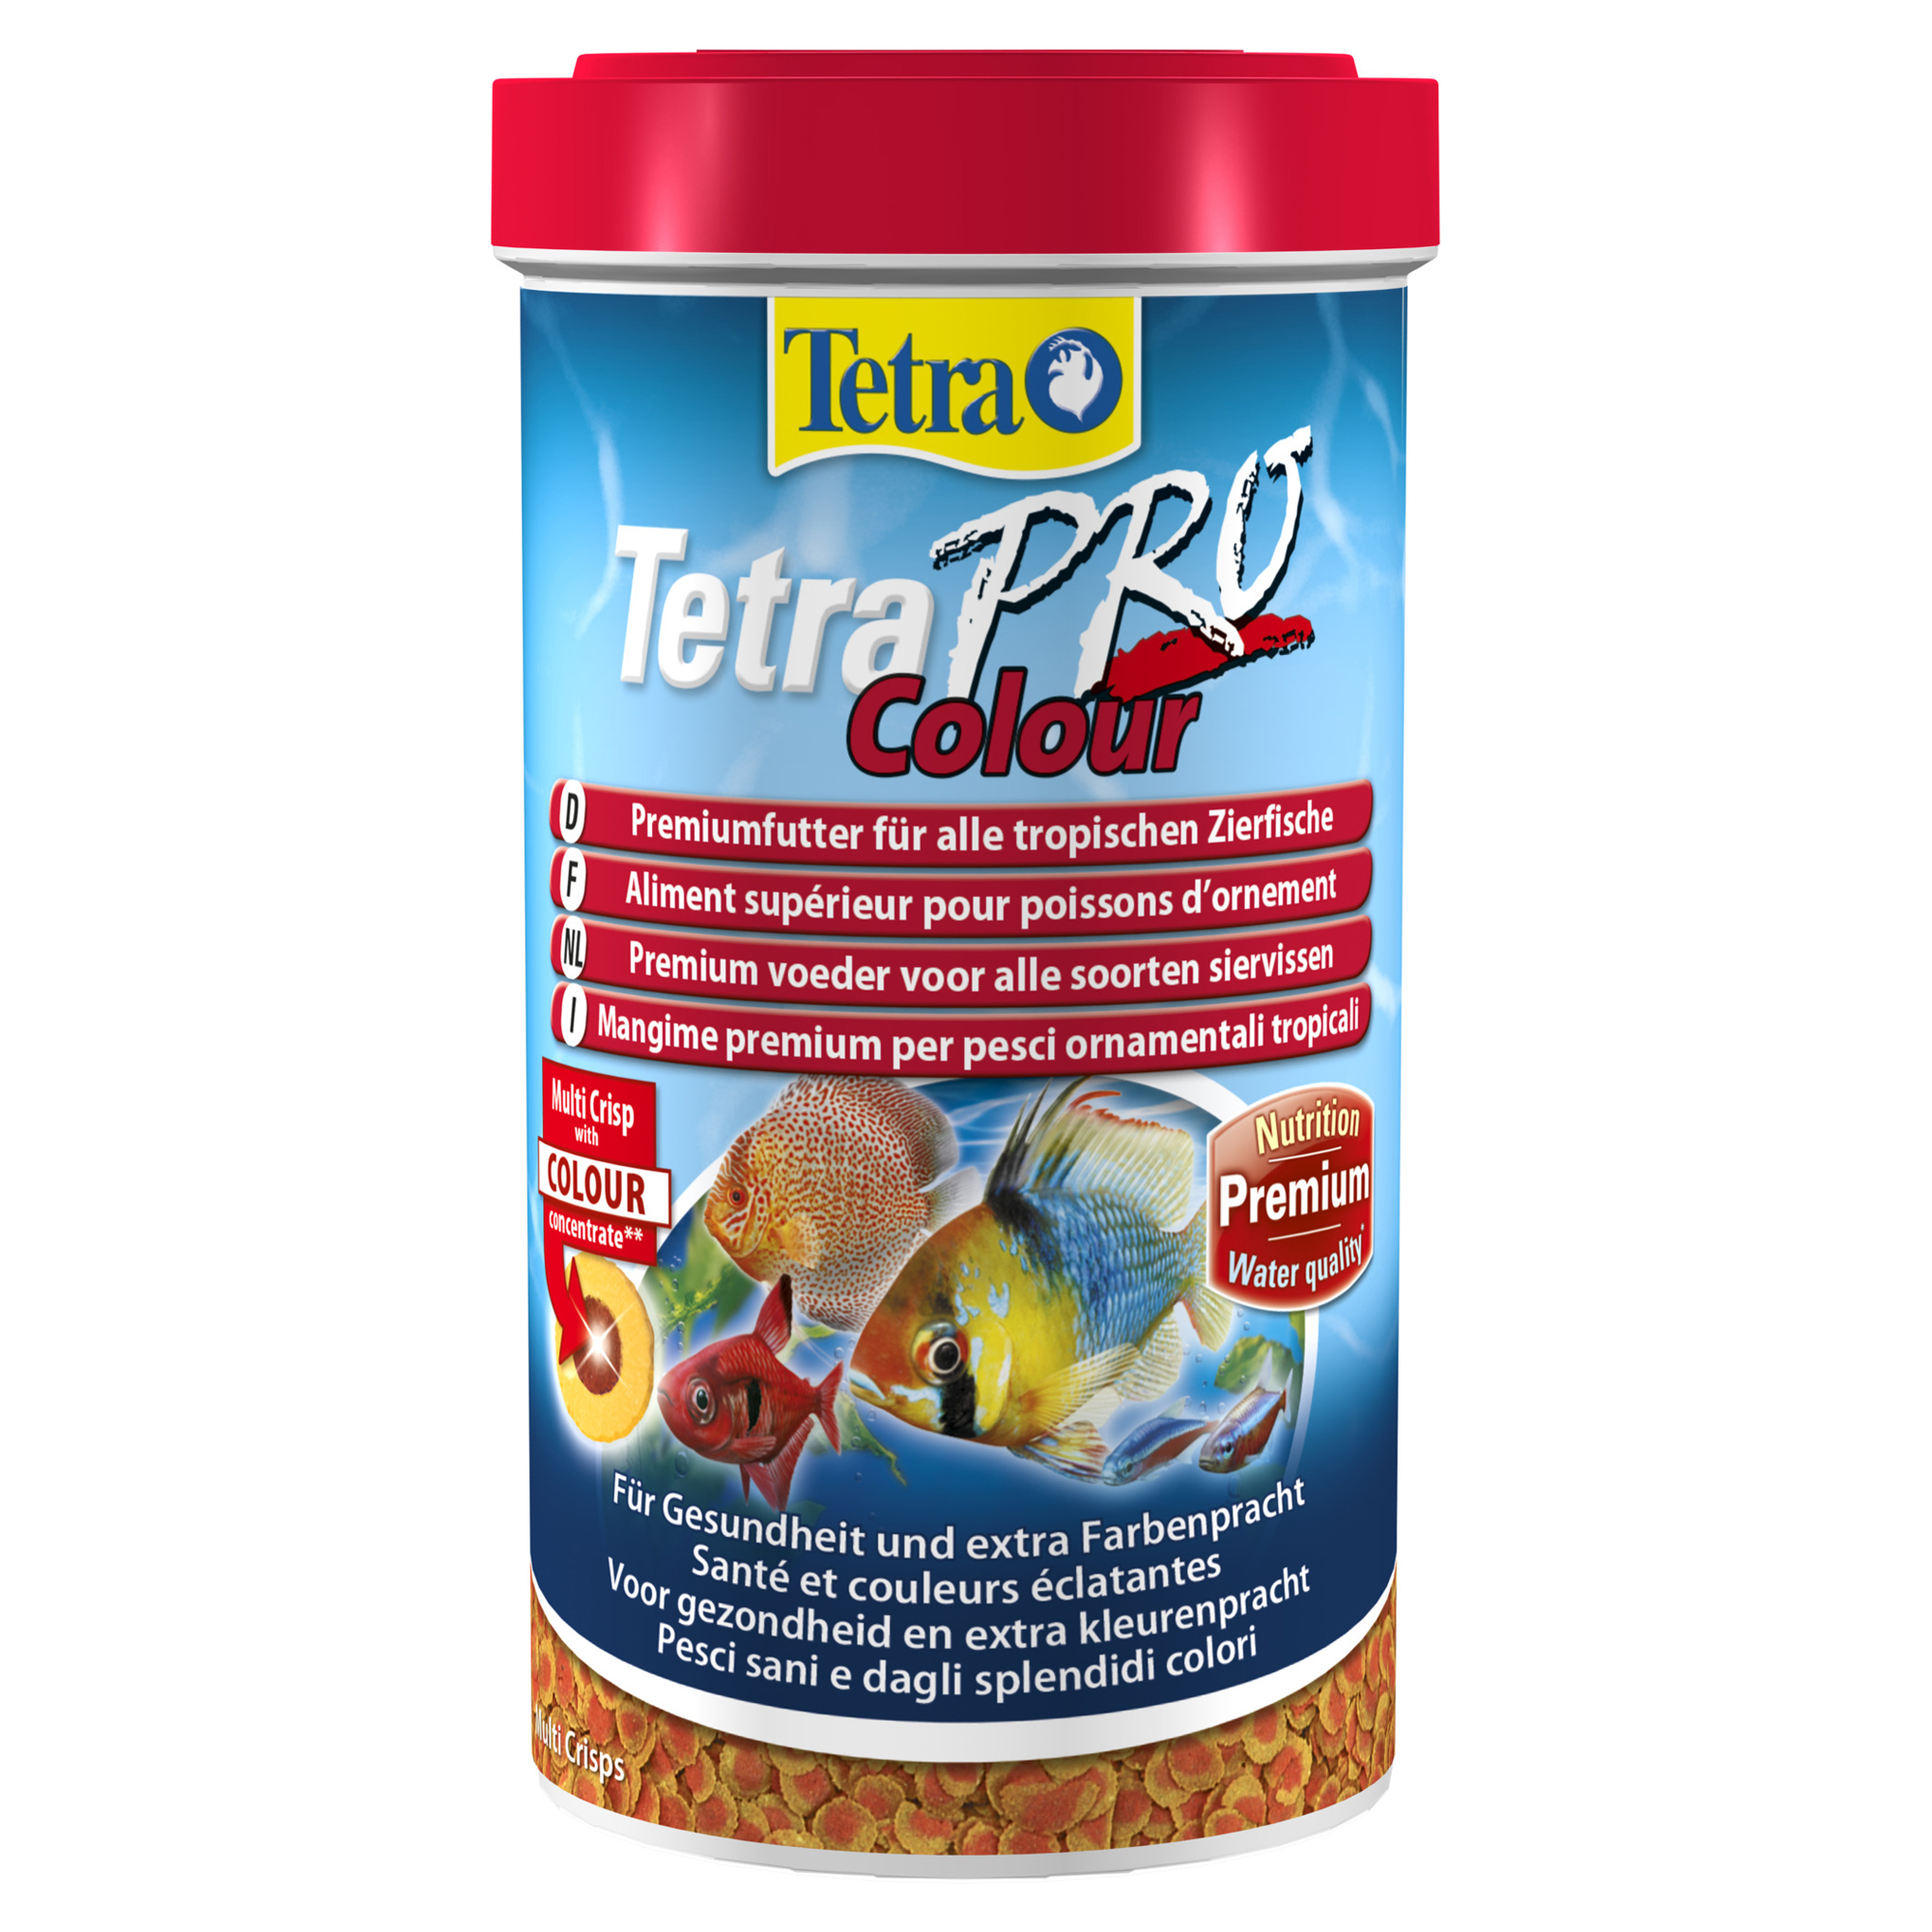 Fischfutter "Pro" Tetra Colour 110 g + product picture